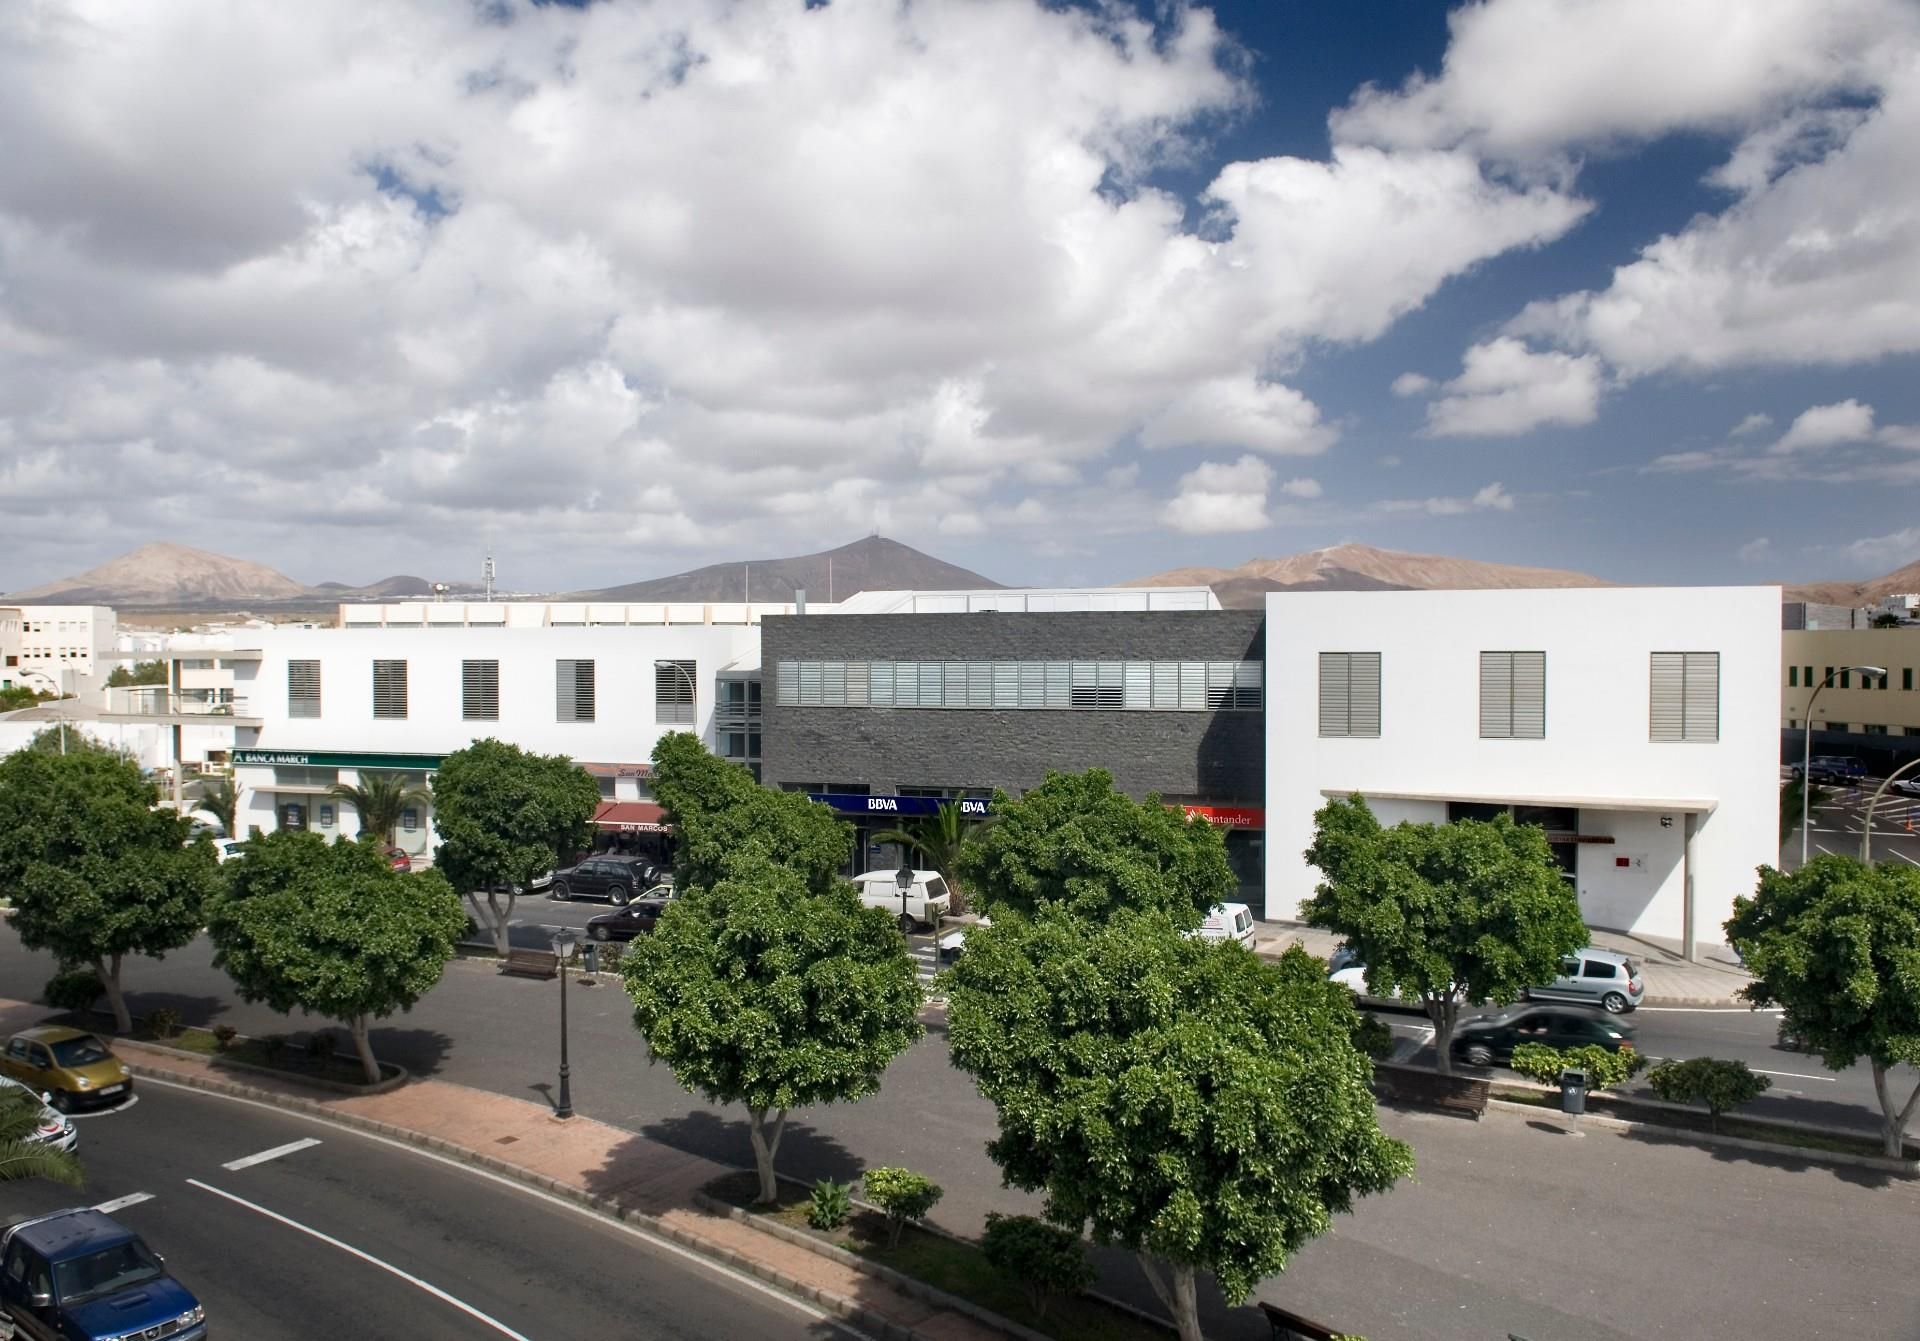 Offices to rent at Lanzarote | fotocasa